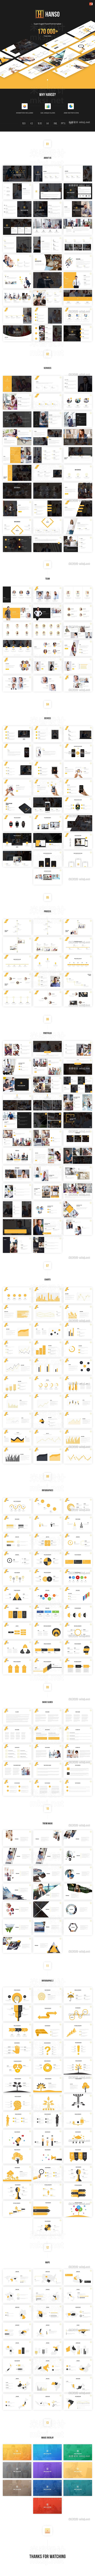 PPT模板 Supercharged PowerPoint Template